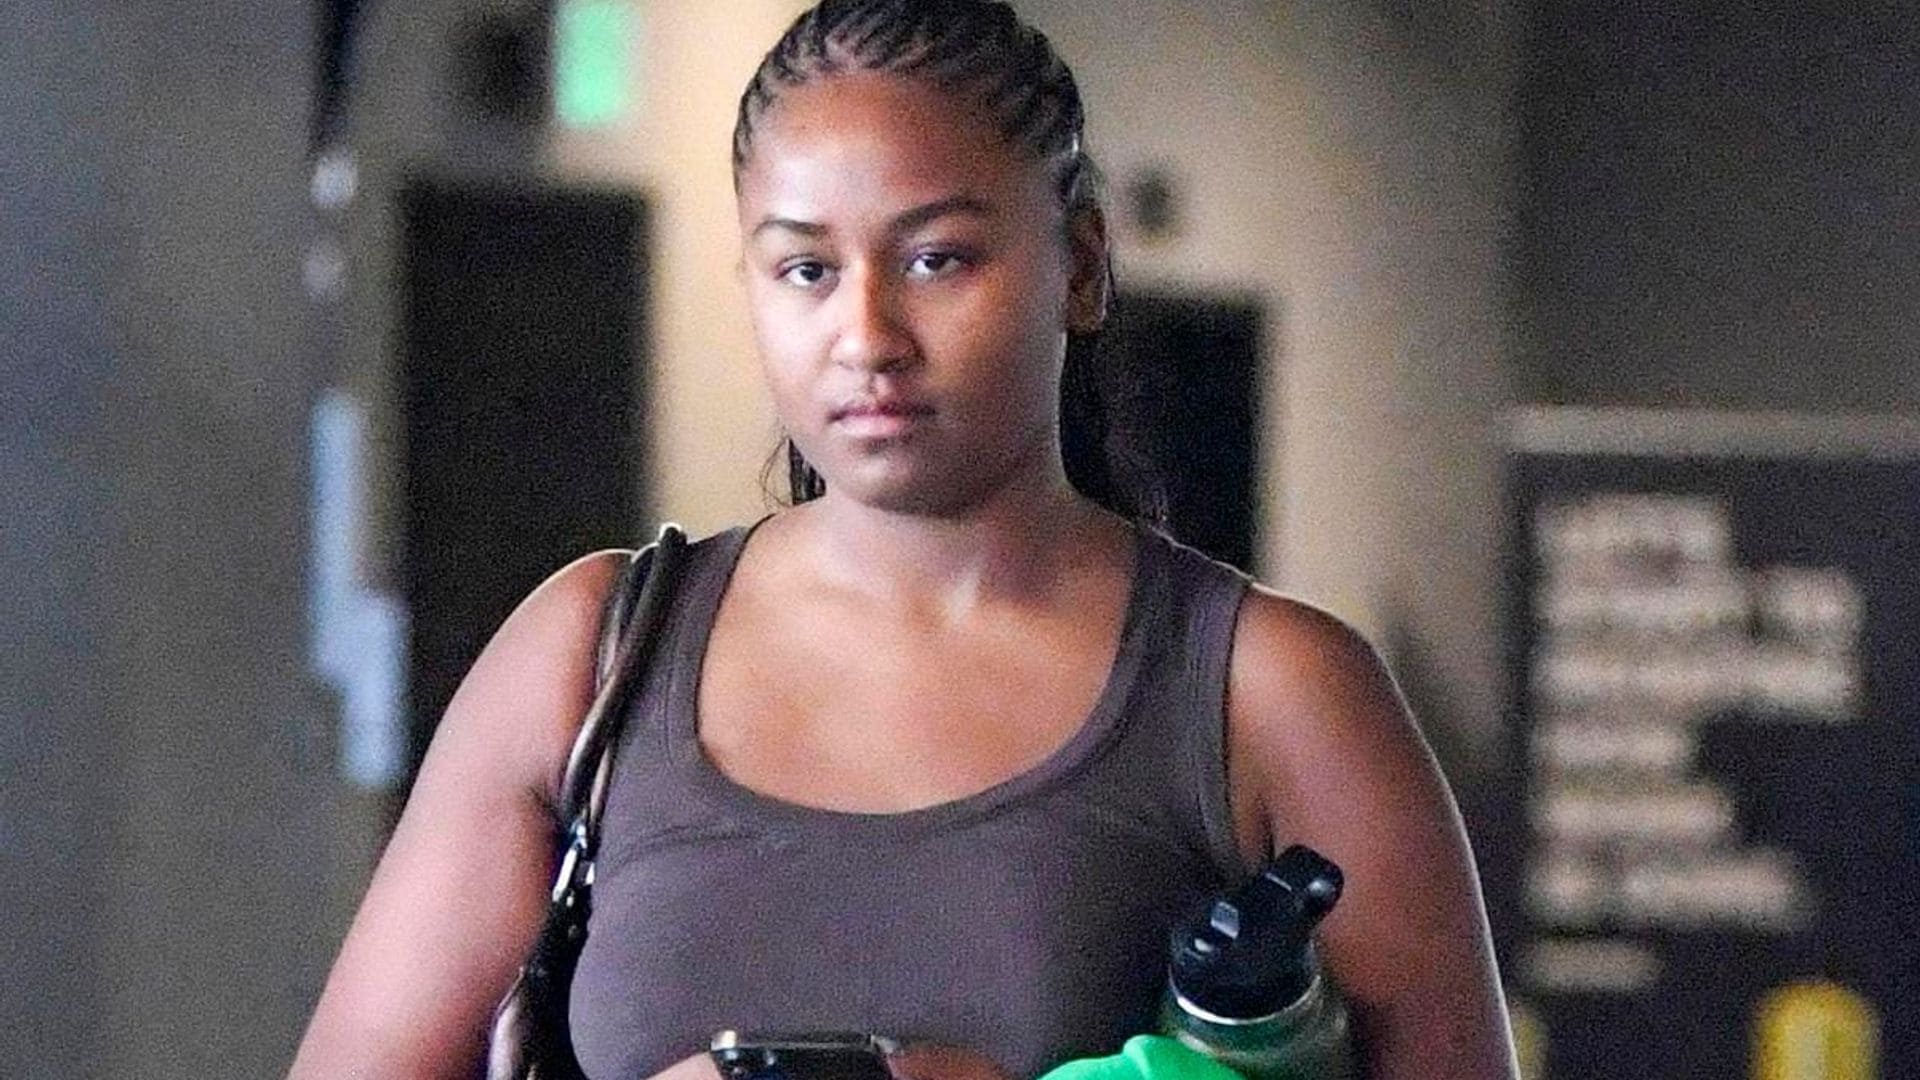 Sasha Obama practices self-care at the spa in an all-green sporty look